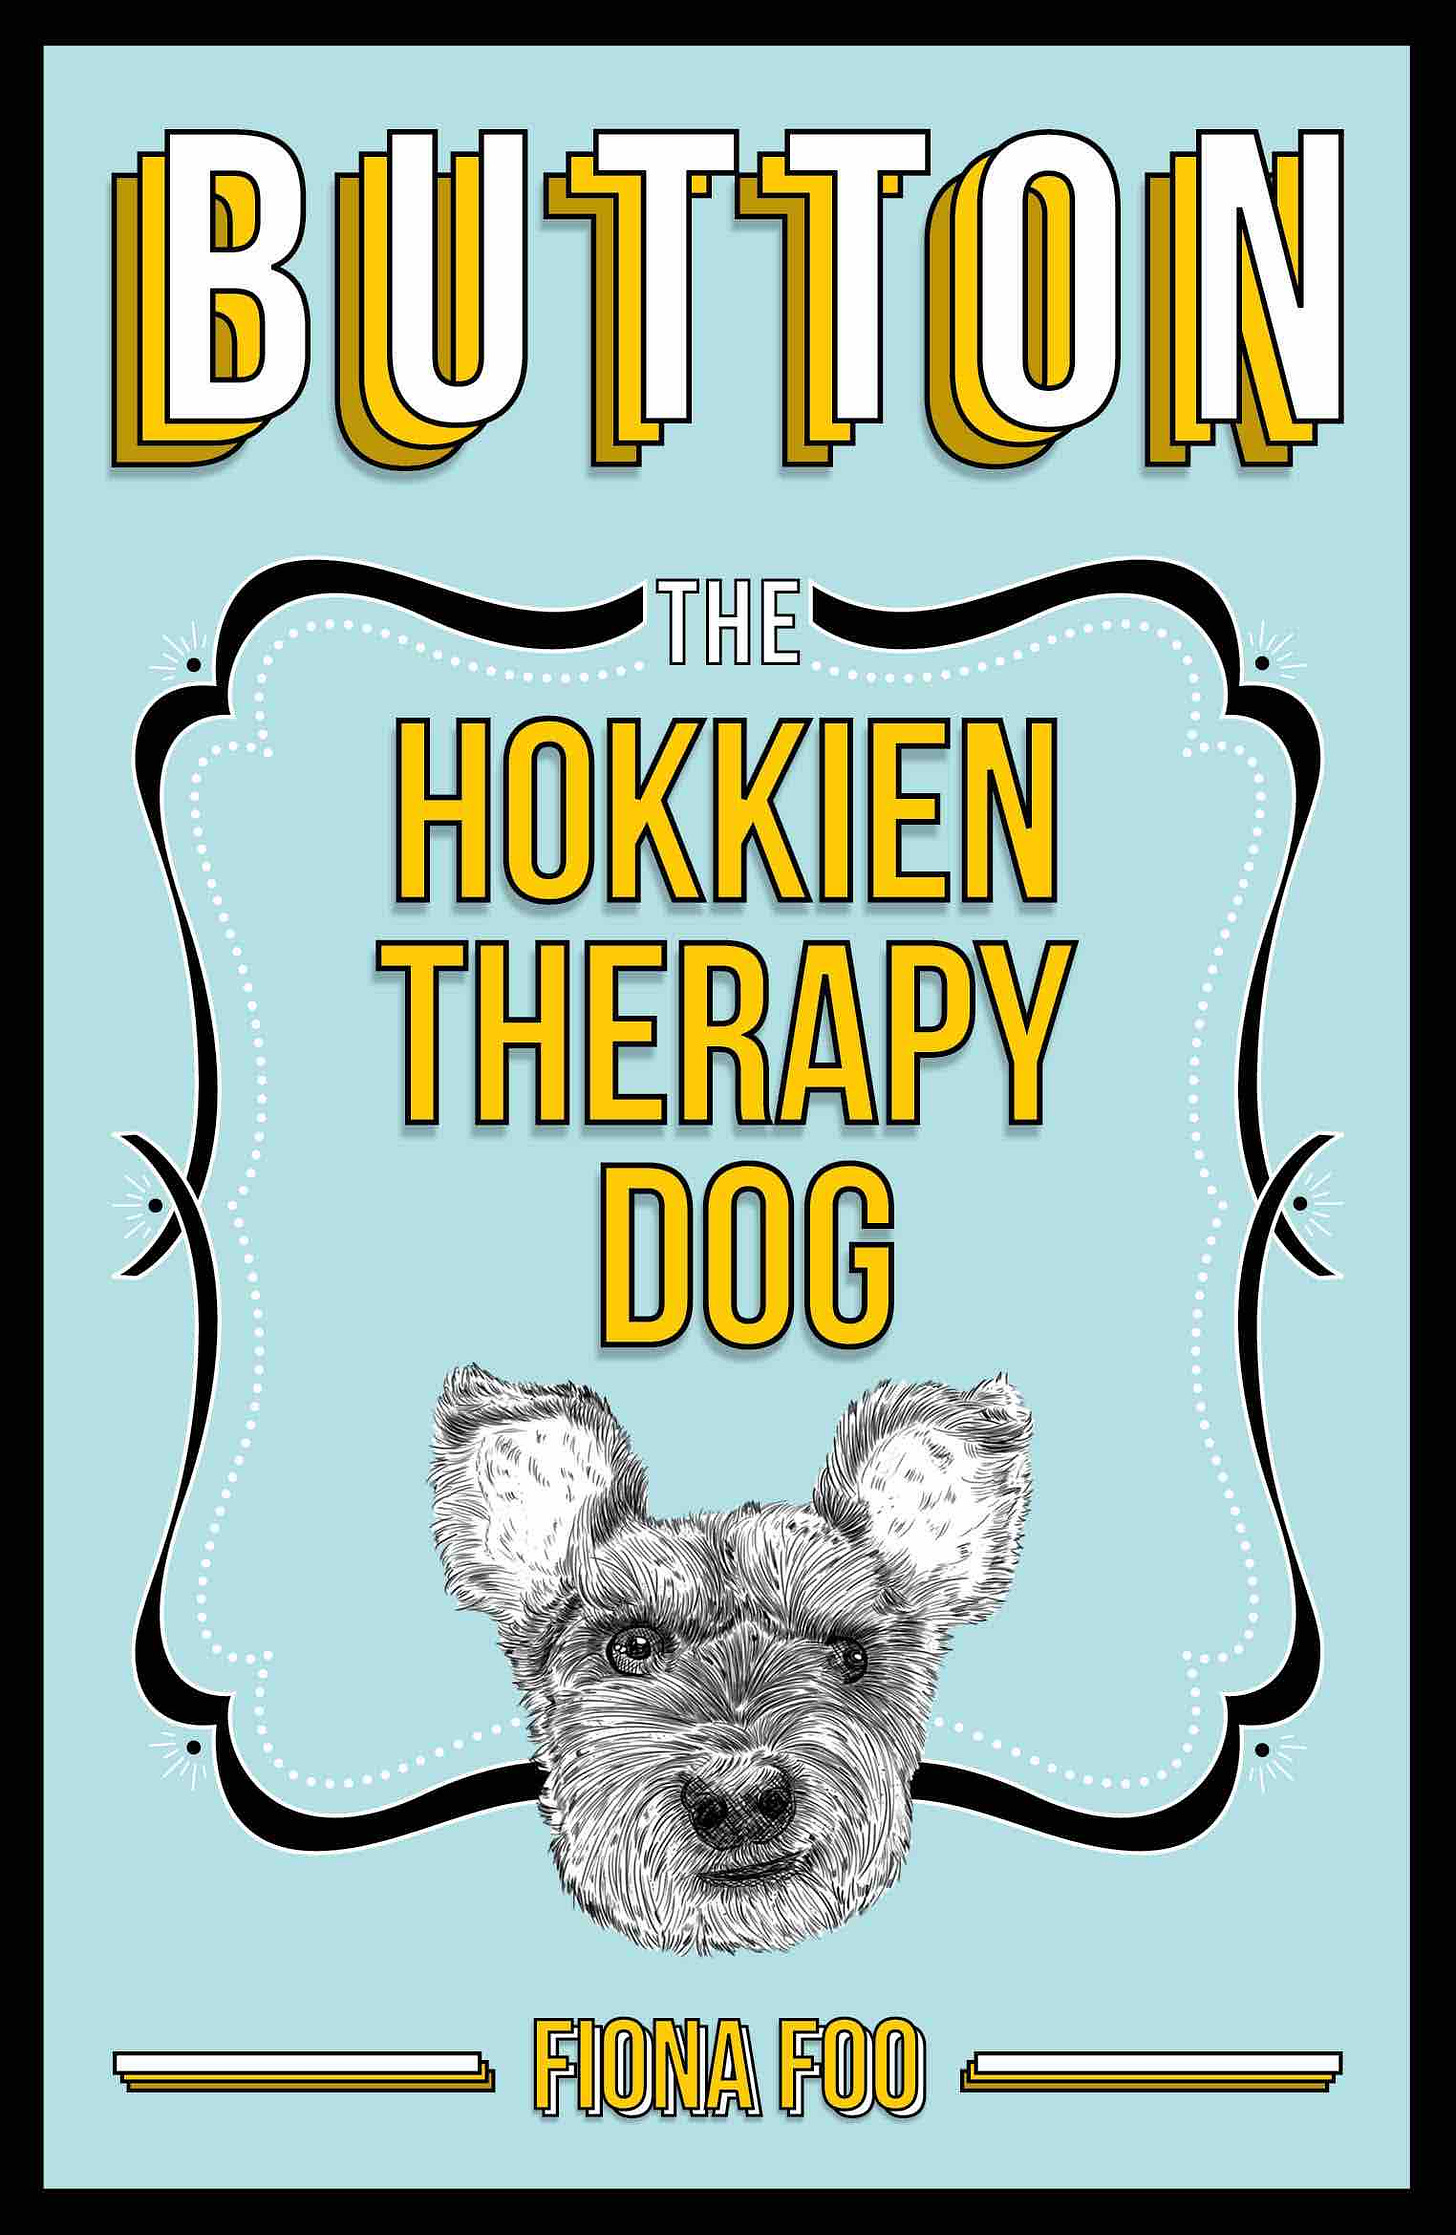 Button The Hokkien Therapy Dog